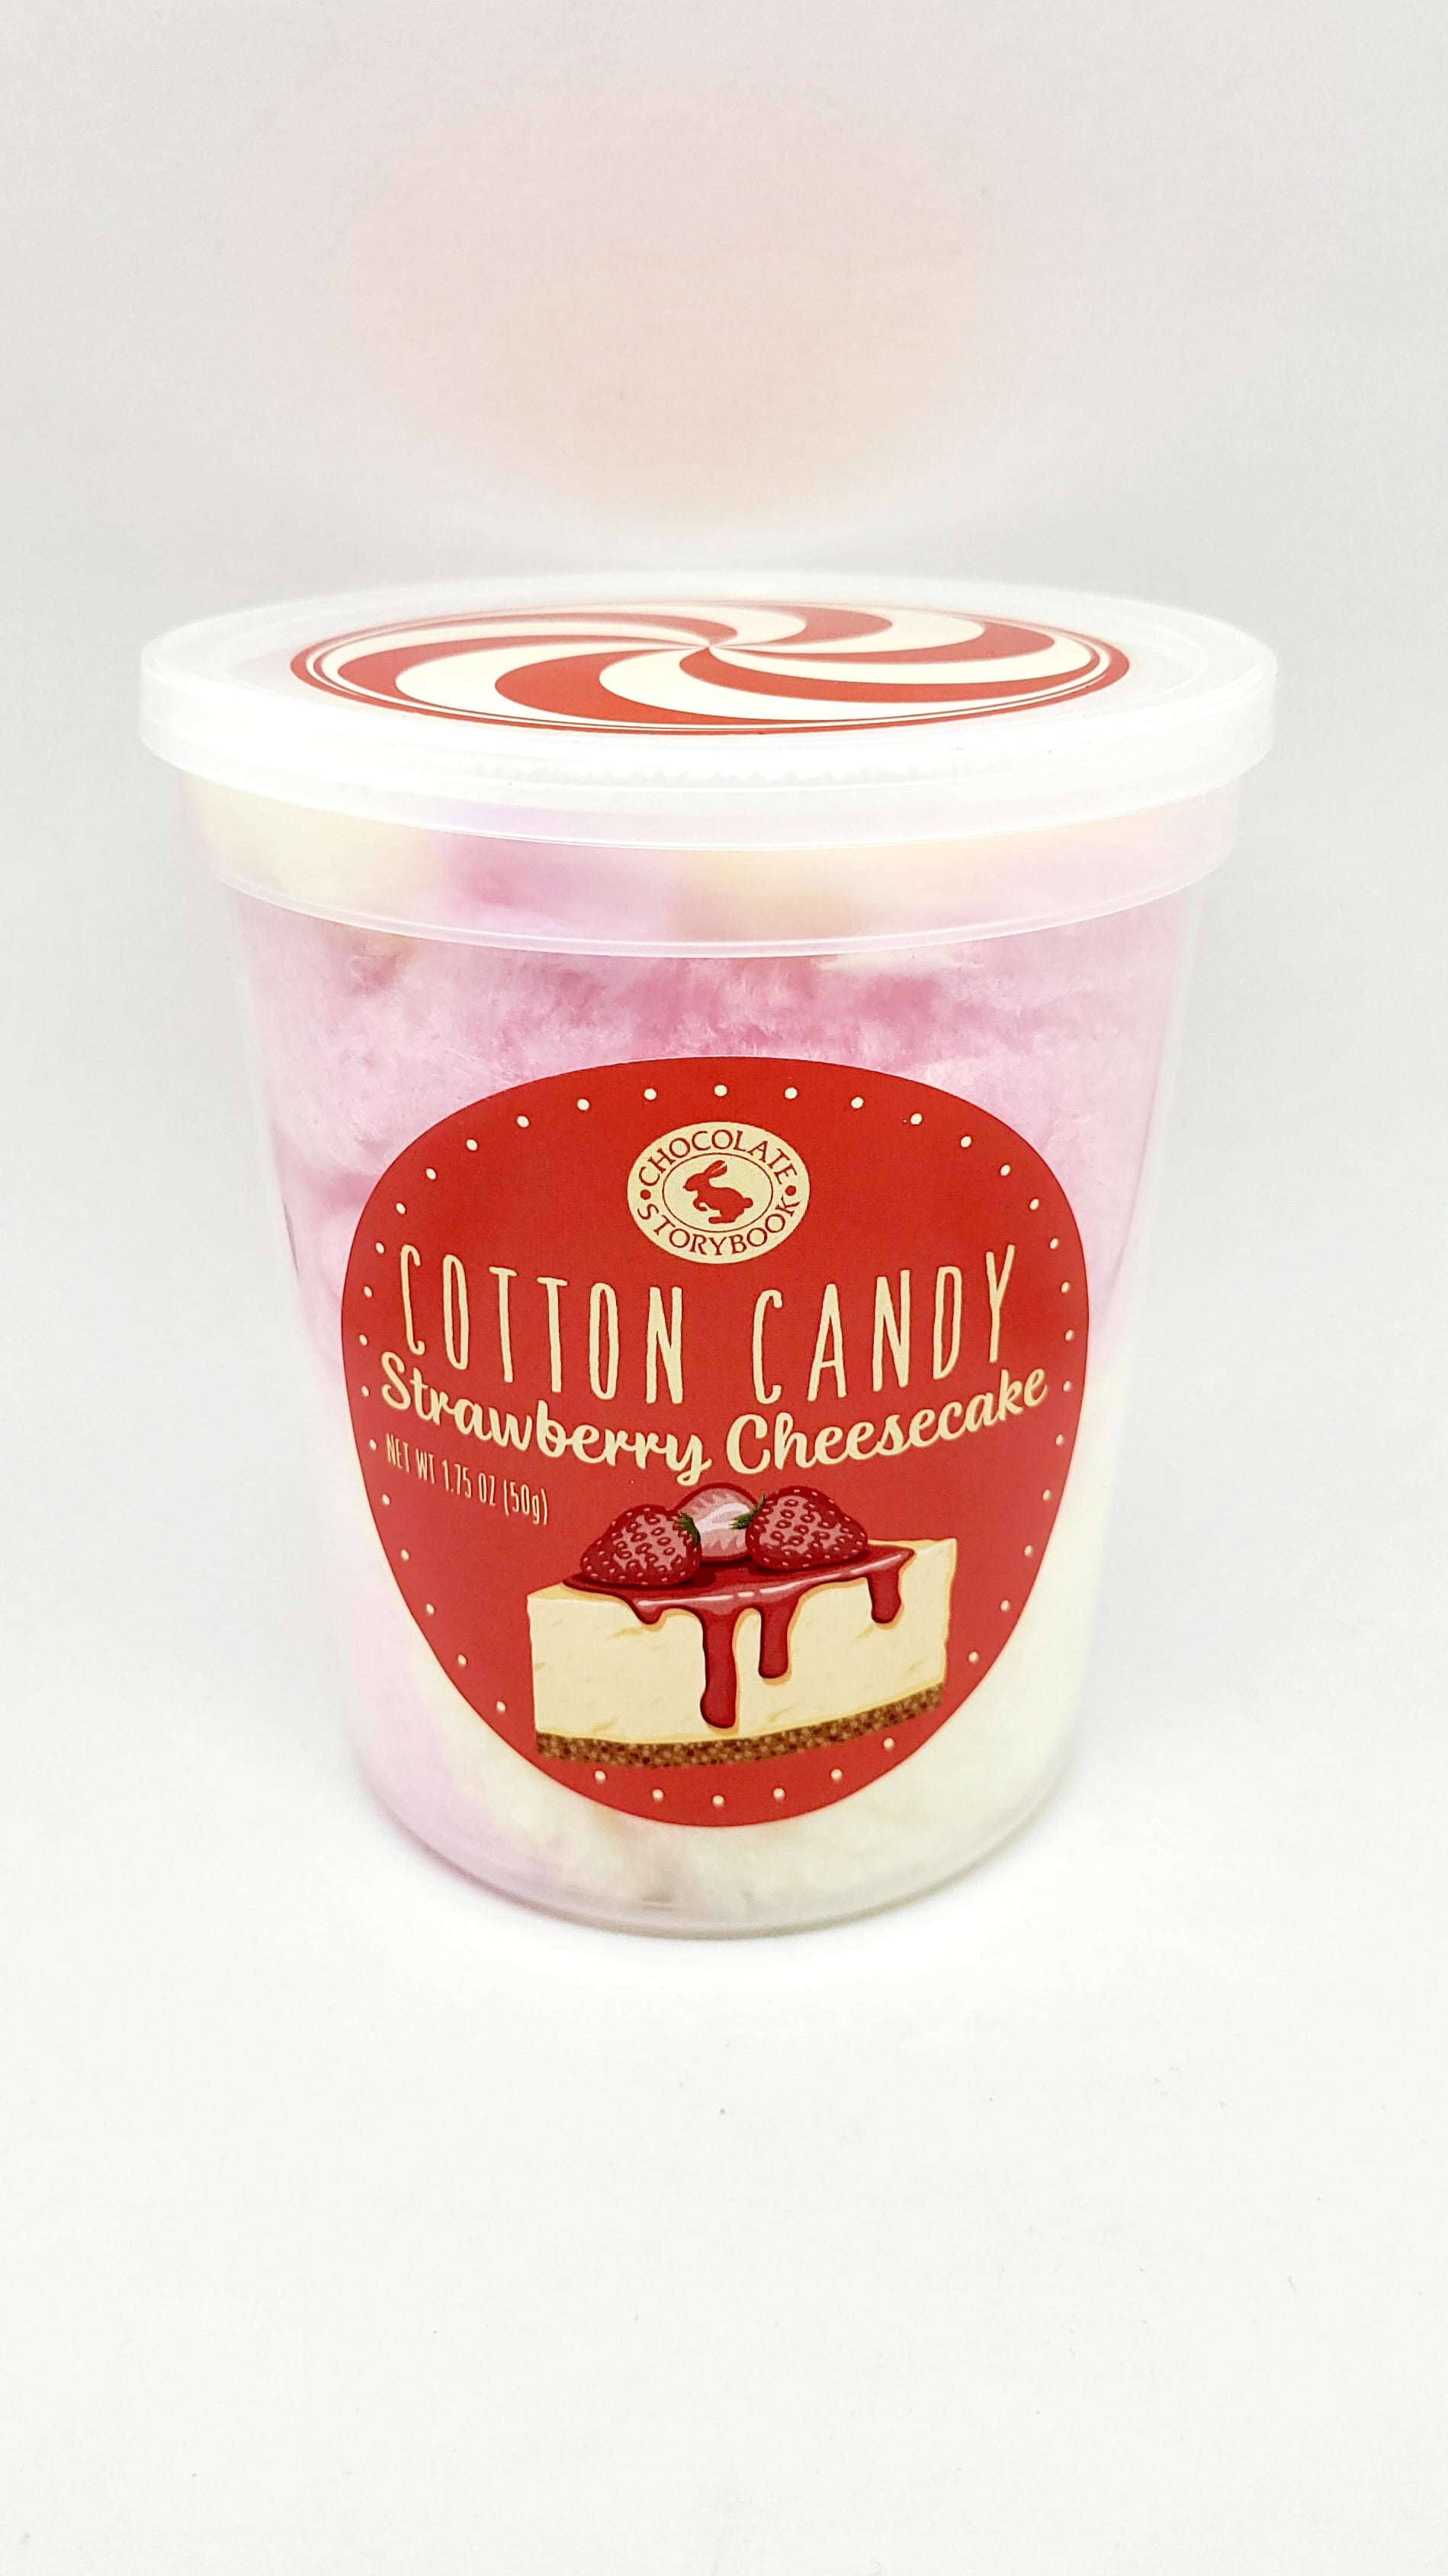 Cotton Candy – Sweetz & More